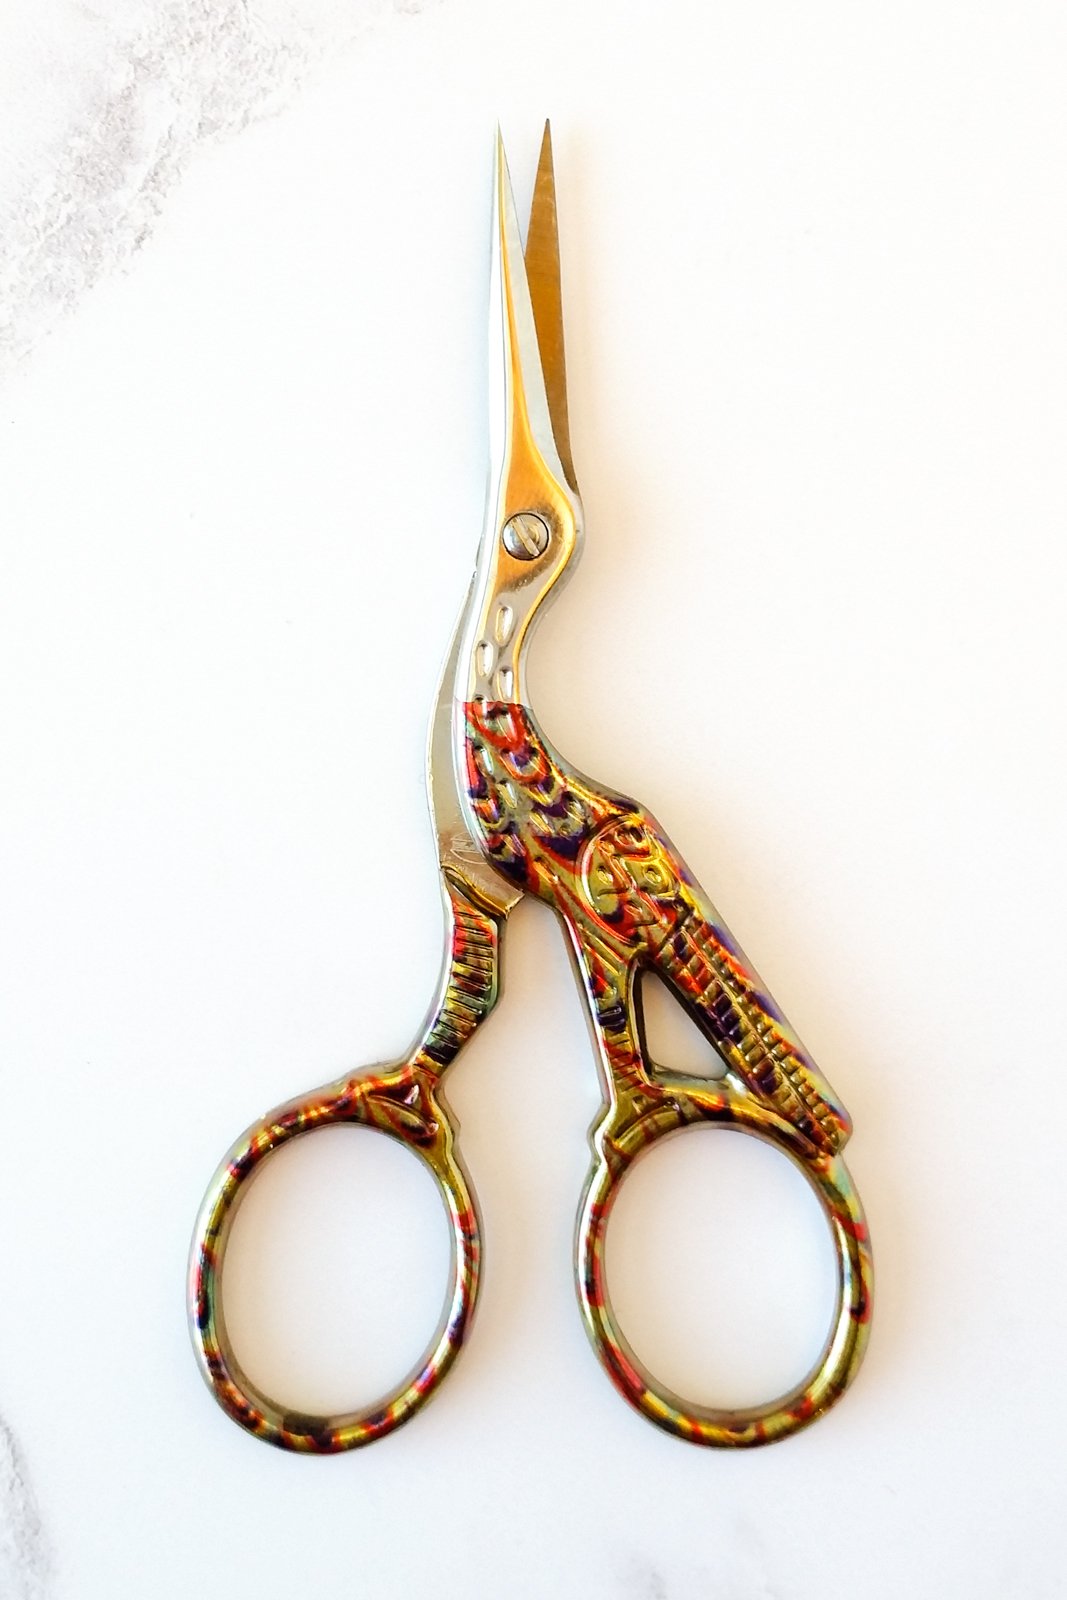 Choosing embroidery and fabric scissors 